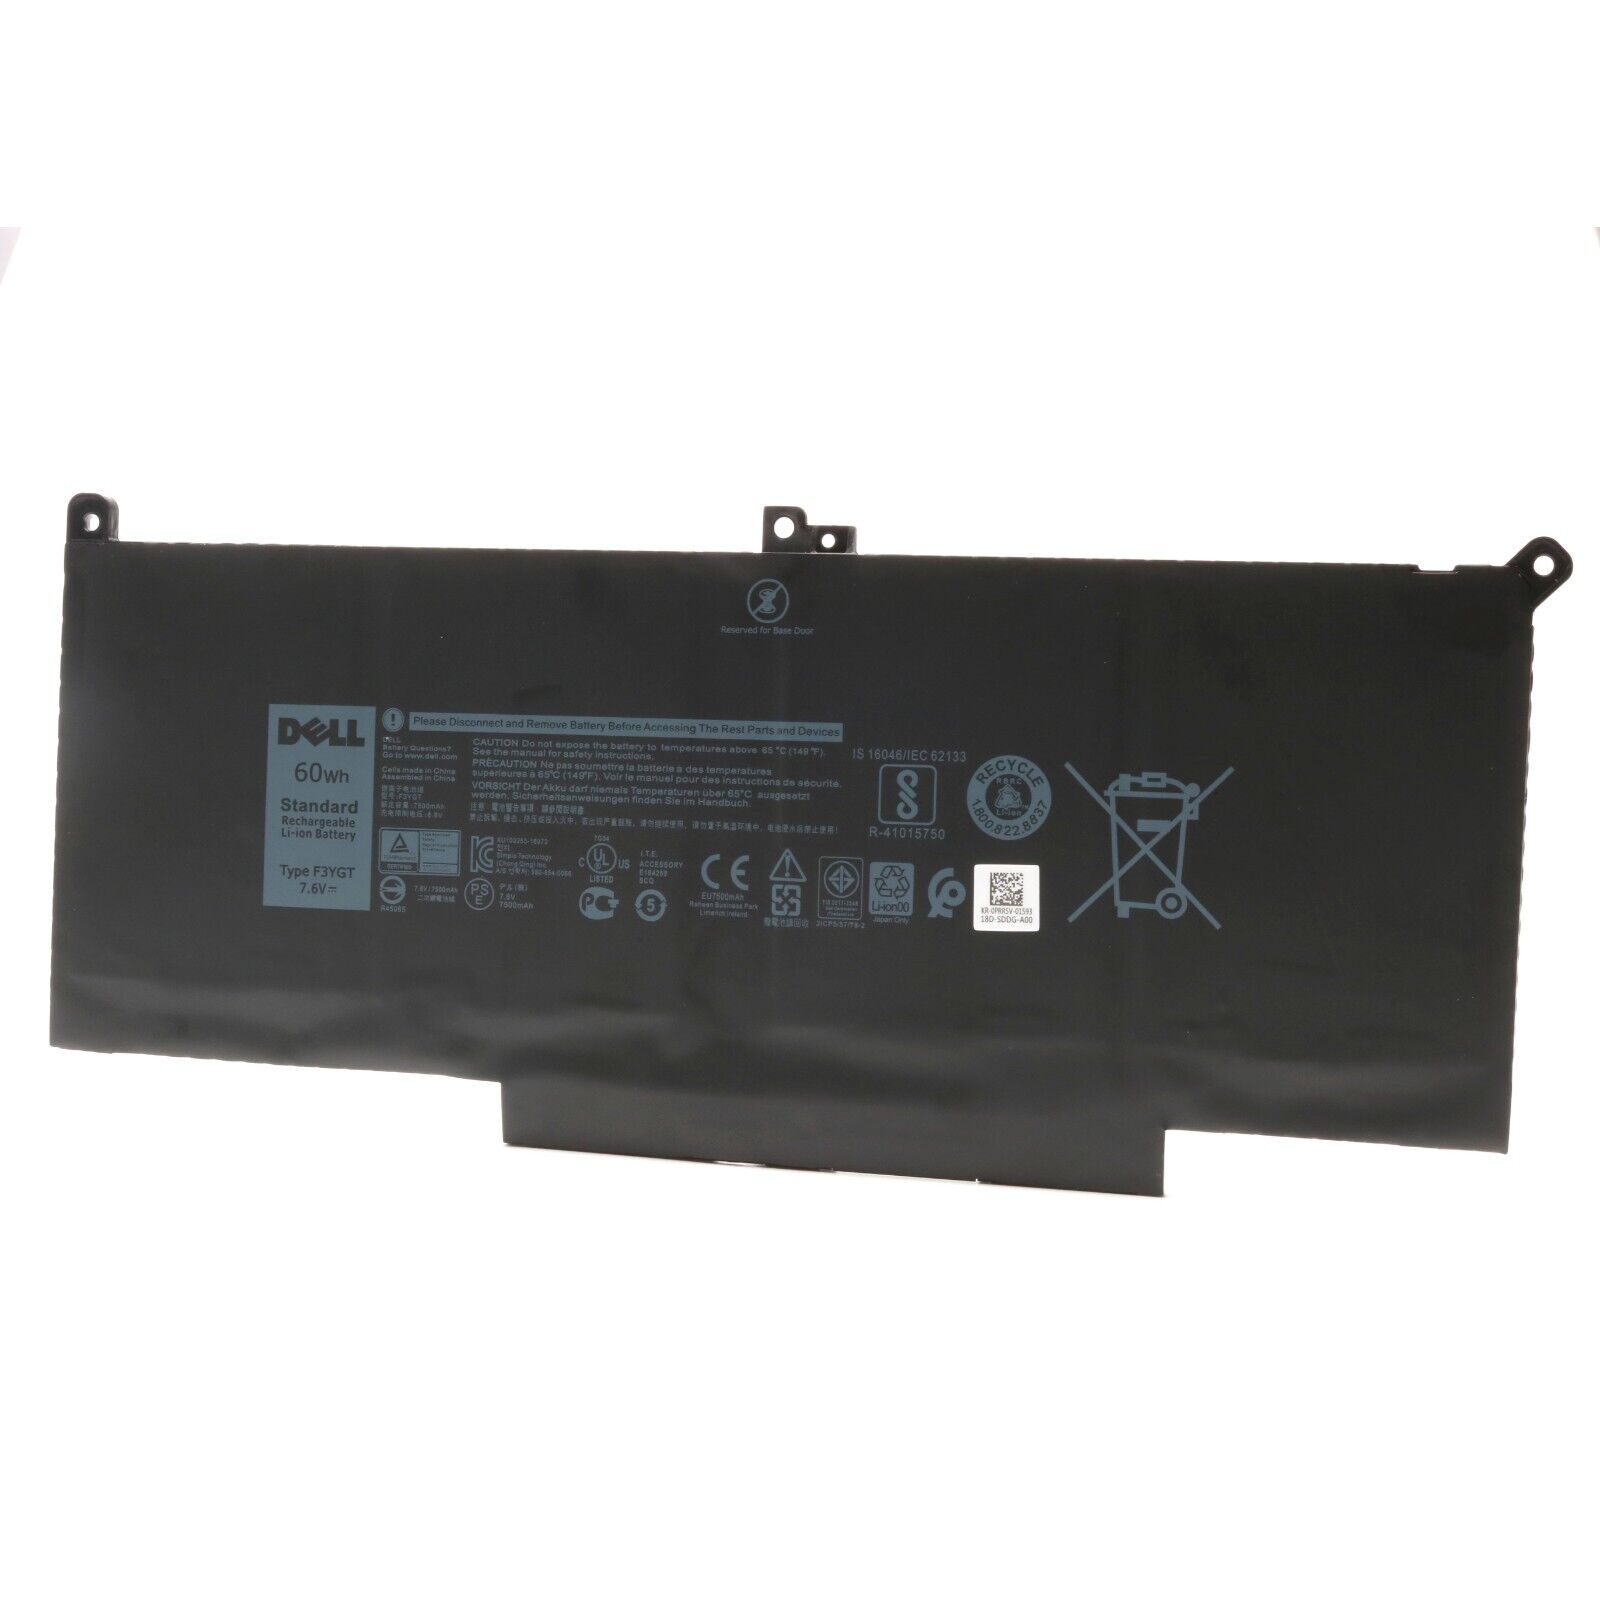 Genuine F3YGT 2X39G Battery For Dell Latitude 12 13 14 7000 7280 7480 7490 DM3WC